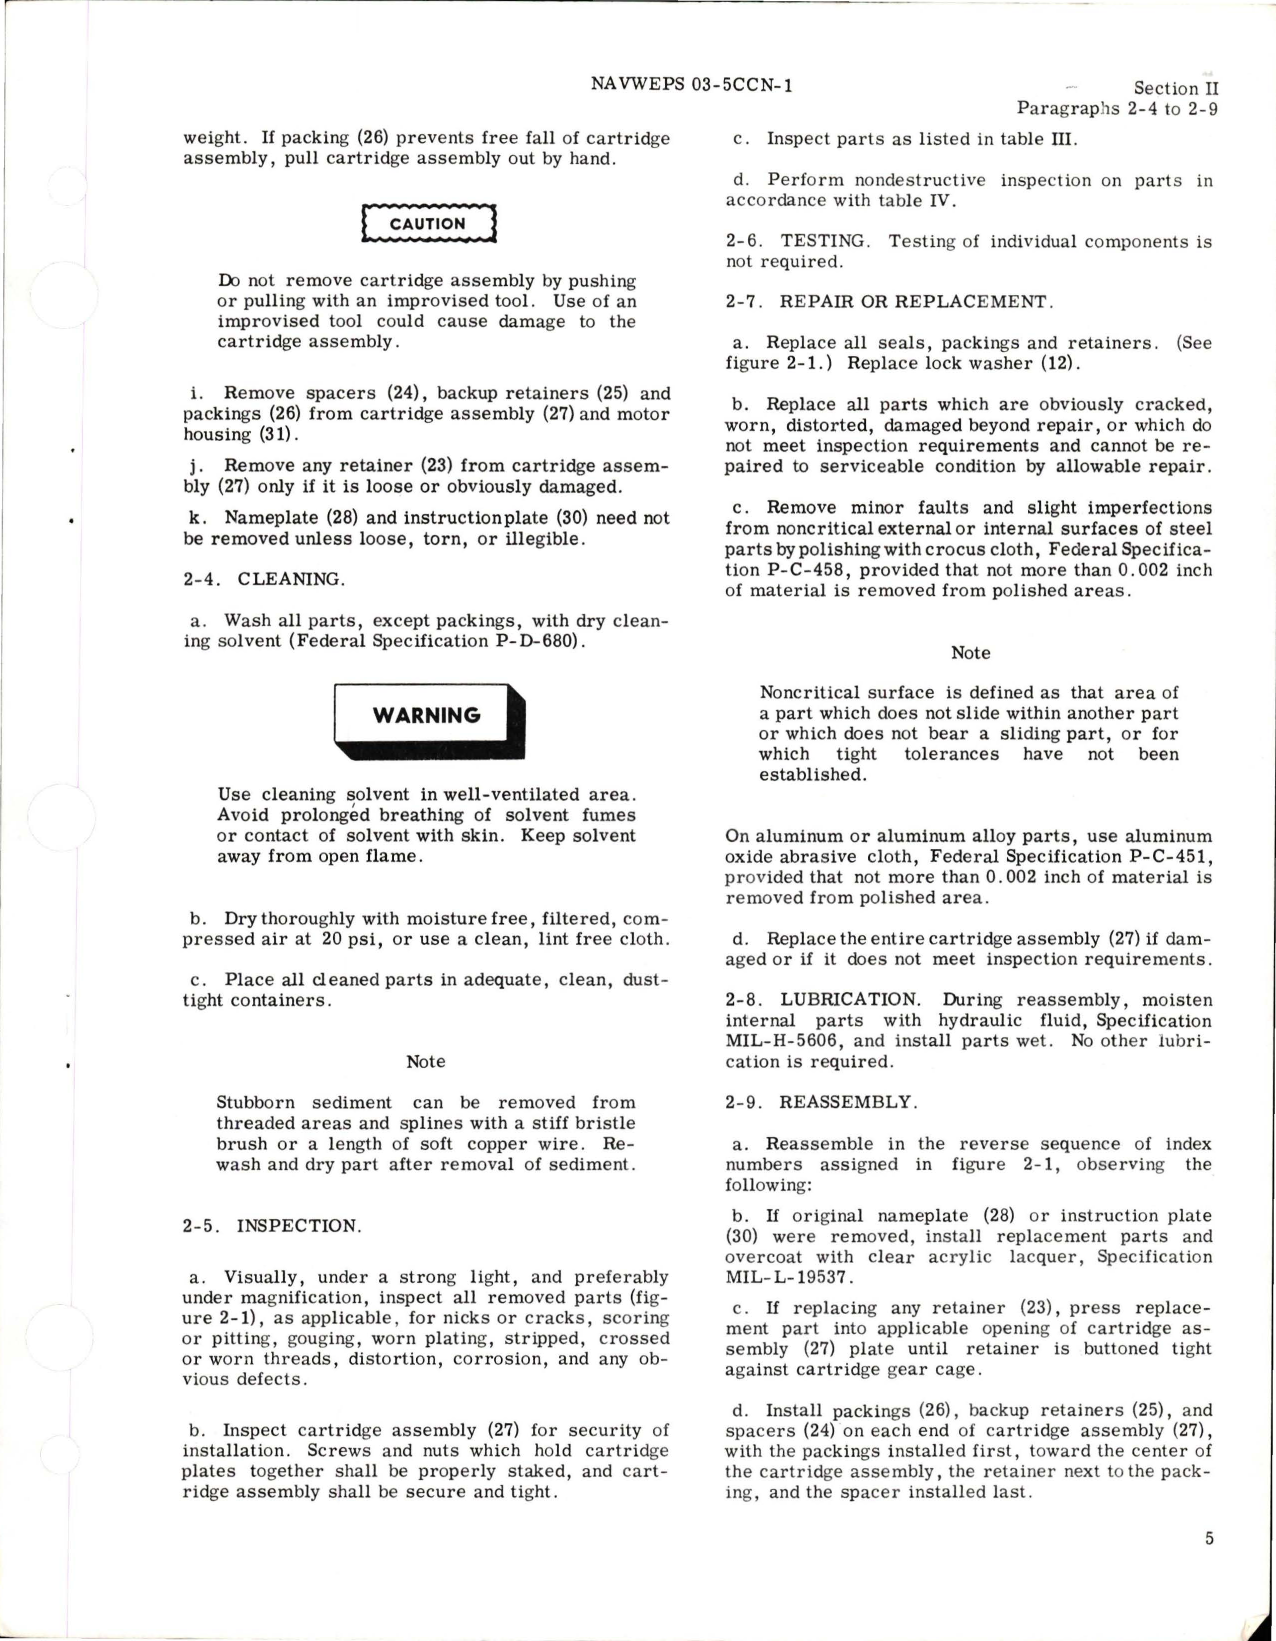 Sample page 7 from AirCorps Library document: Overhaul Instructions for Evaporator Fan Motor - Part 70341